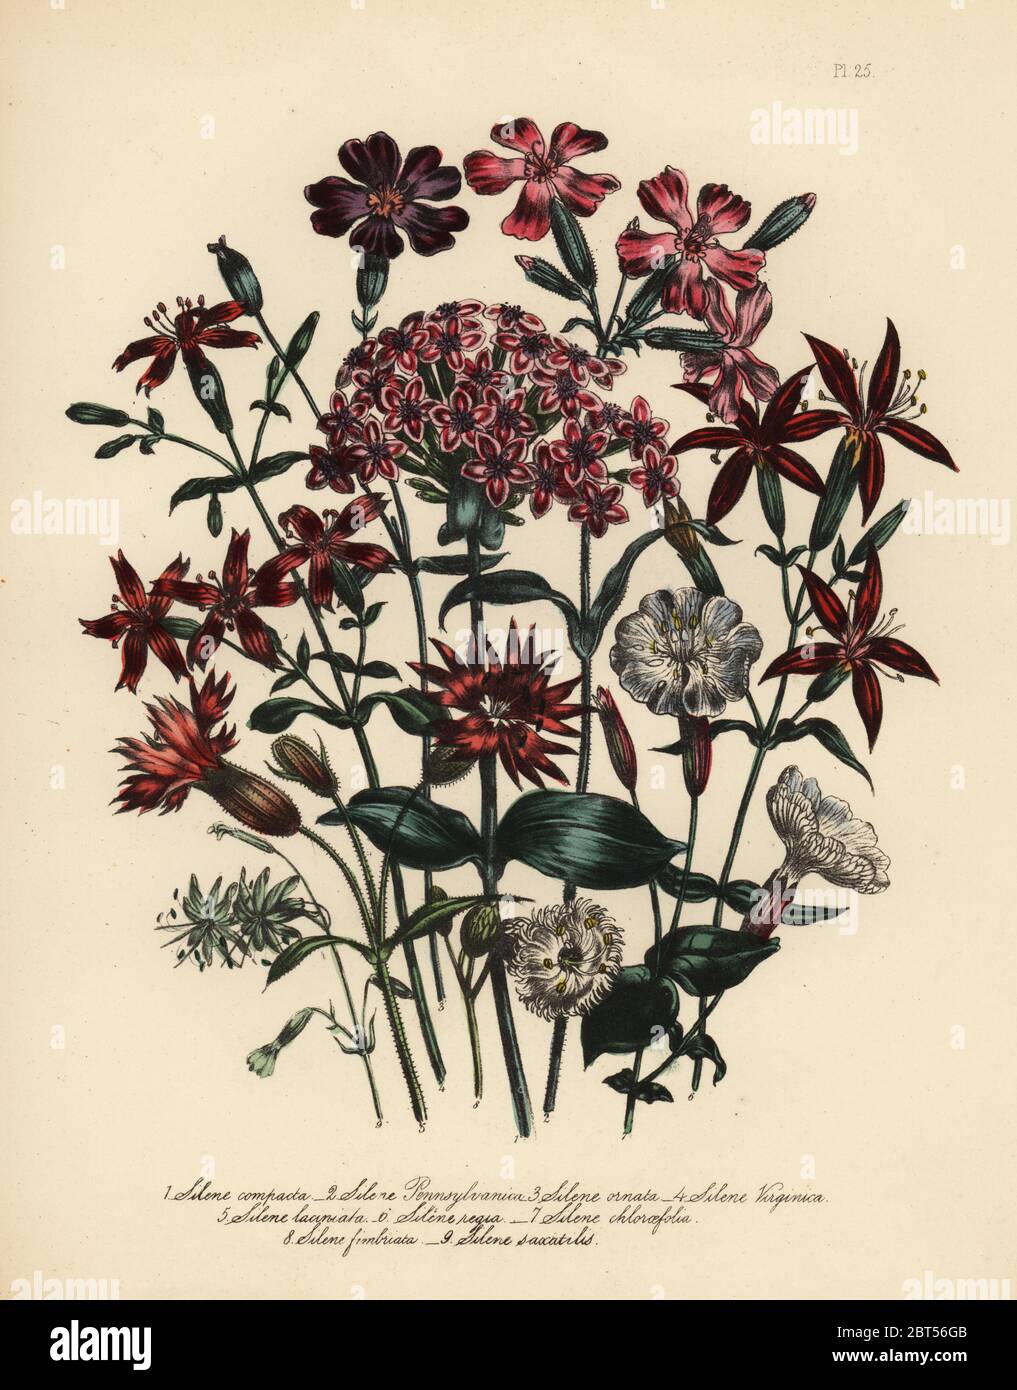 Compact-flowered catchfly, Silene compacta, American wild pink, S. pennsylvanica, ornatental catchfly, S. ornata, Virginian catchfly, S. virginica, cut-flowered catchfly, S. jaciniata, royal catchfly, S. regia, chlora-leaved catchfly, S. chloraefolia, fringed catchfly, S. fimbriata, and stone catchfly, S. saxatilis. Handfinished chromolithograph by Henry Noel Humphreys after an illustration by Jane Loudon from Mrs. Jane Loudon's Ladies Flower Garden of Ornamental Perennials, William S. Orr, London, 1849. Stock Photo